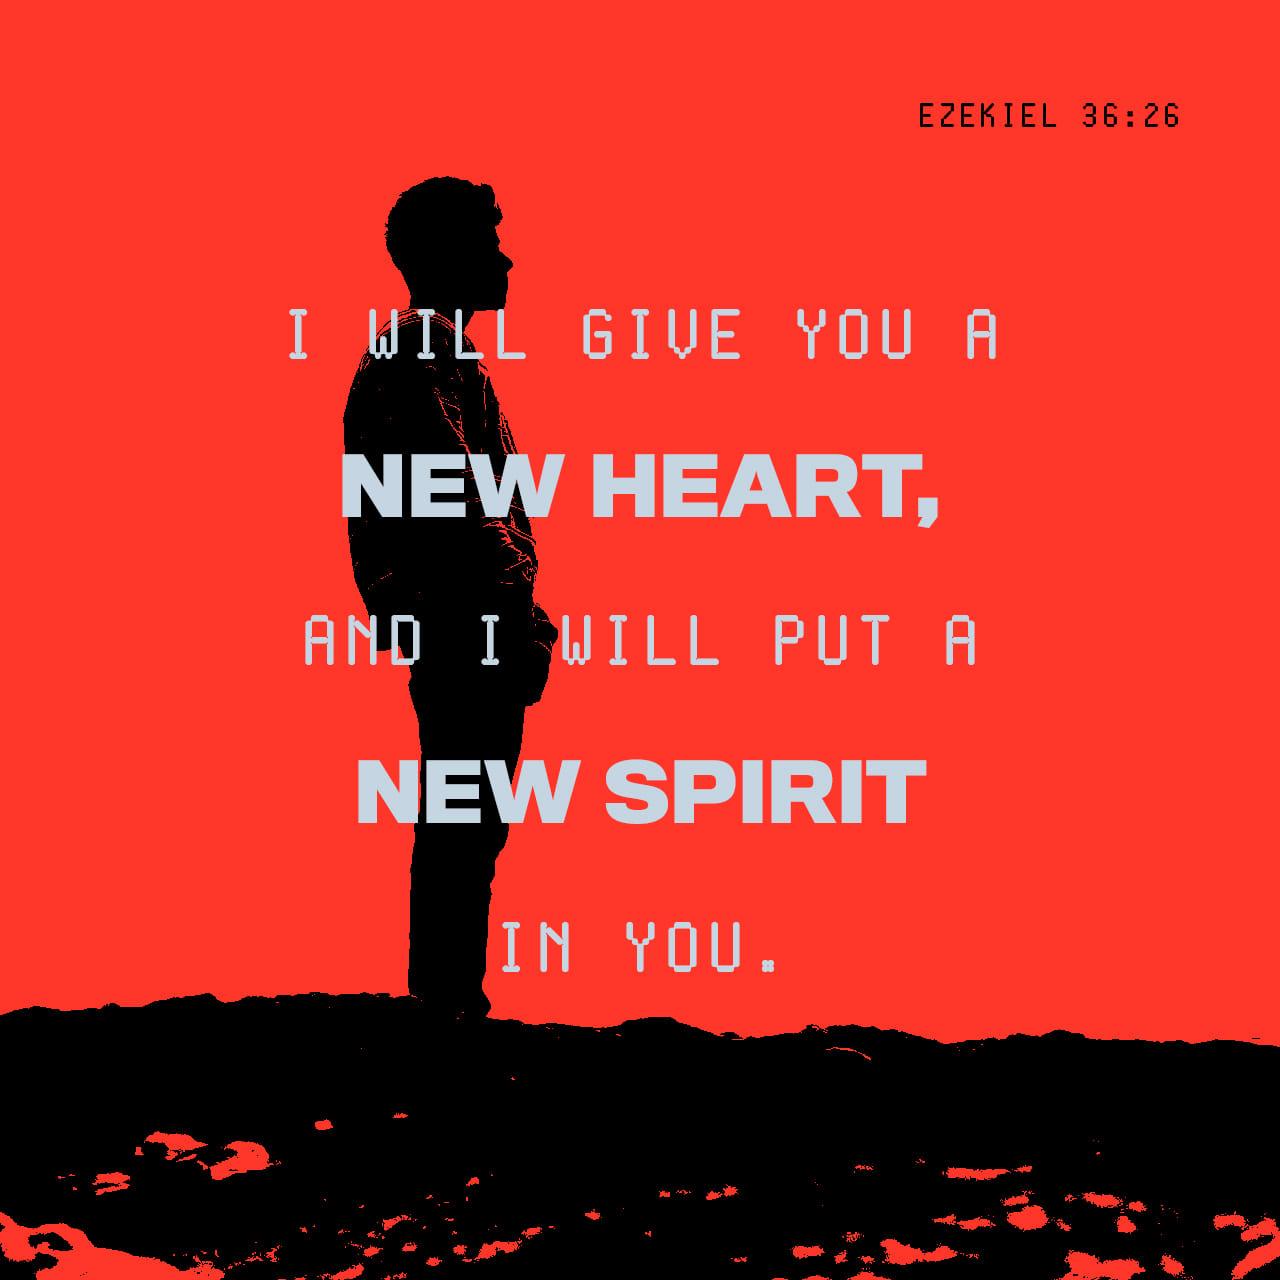 Bible Verse of the Day - day 152 - image 52766 (Ezekiel 36:26)